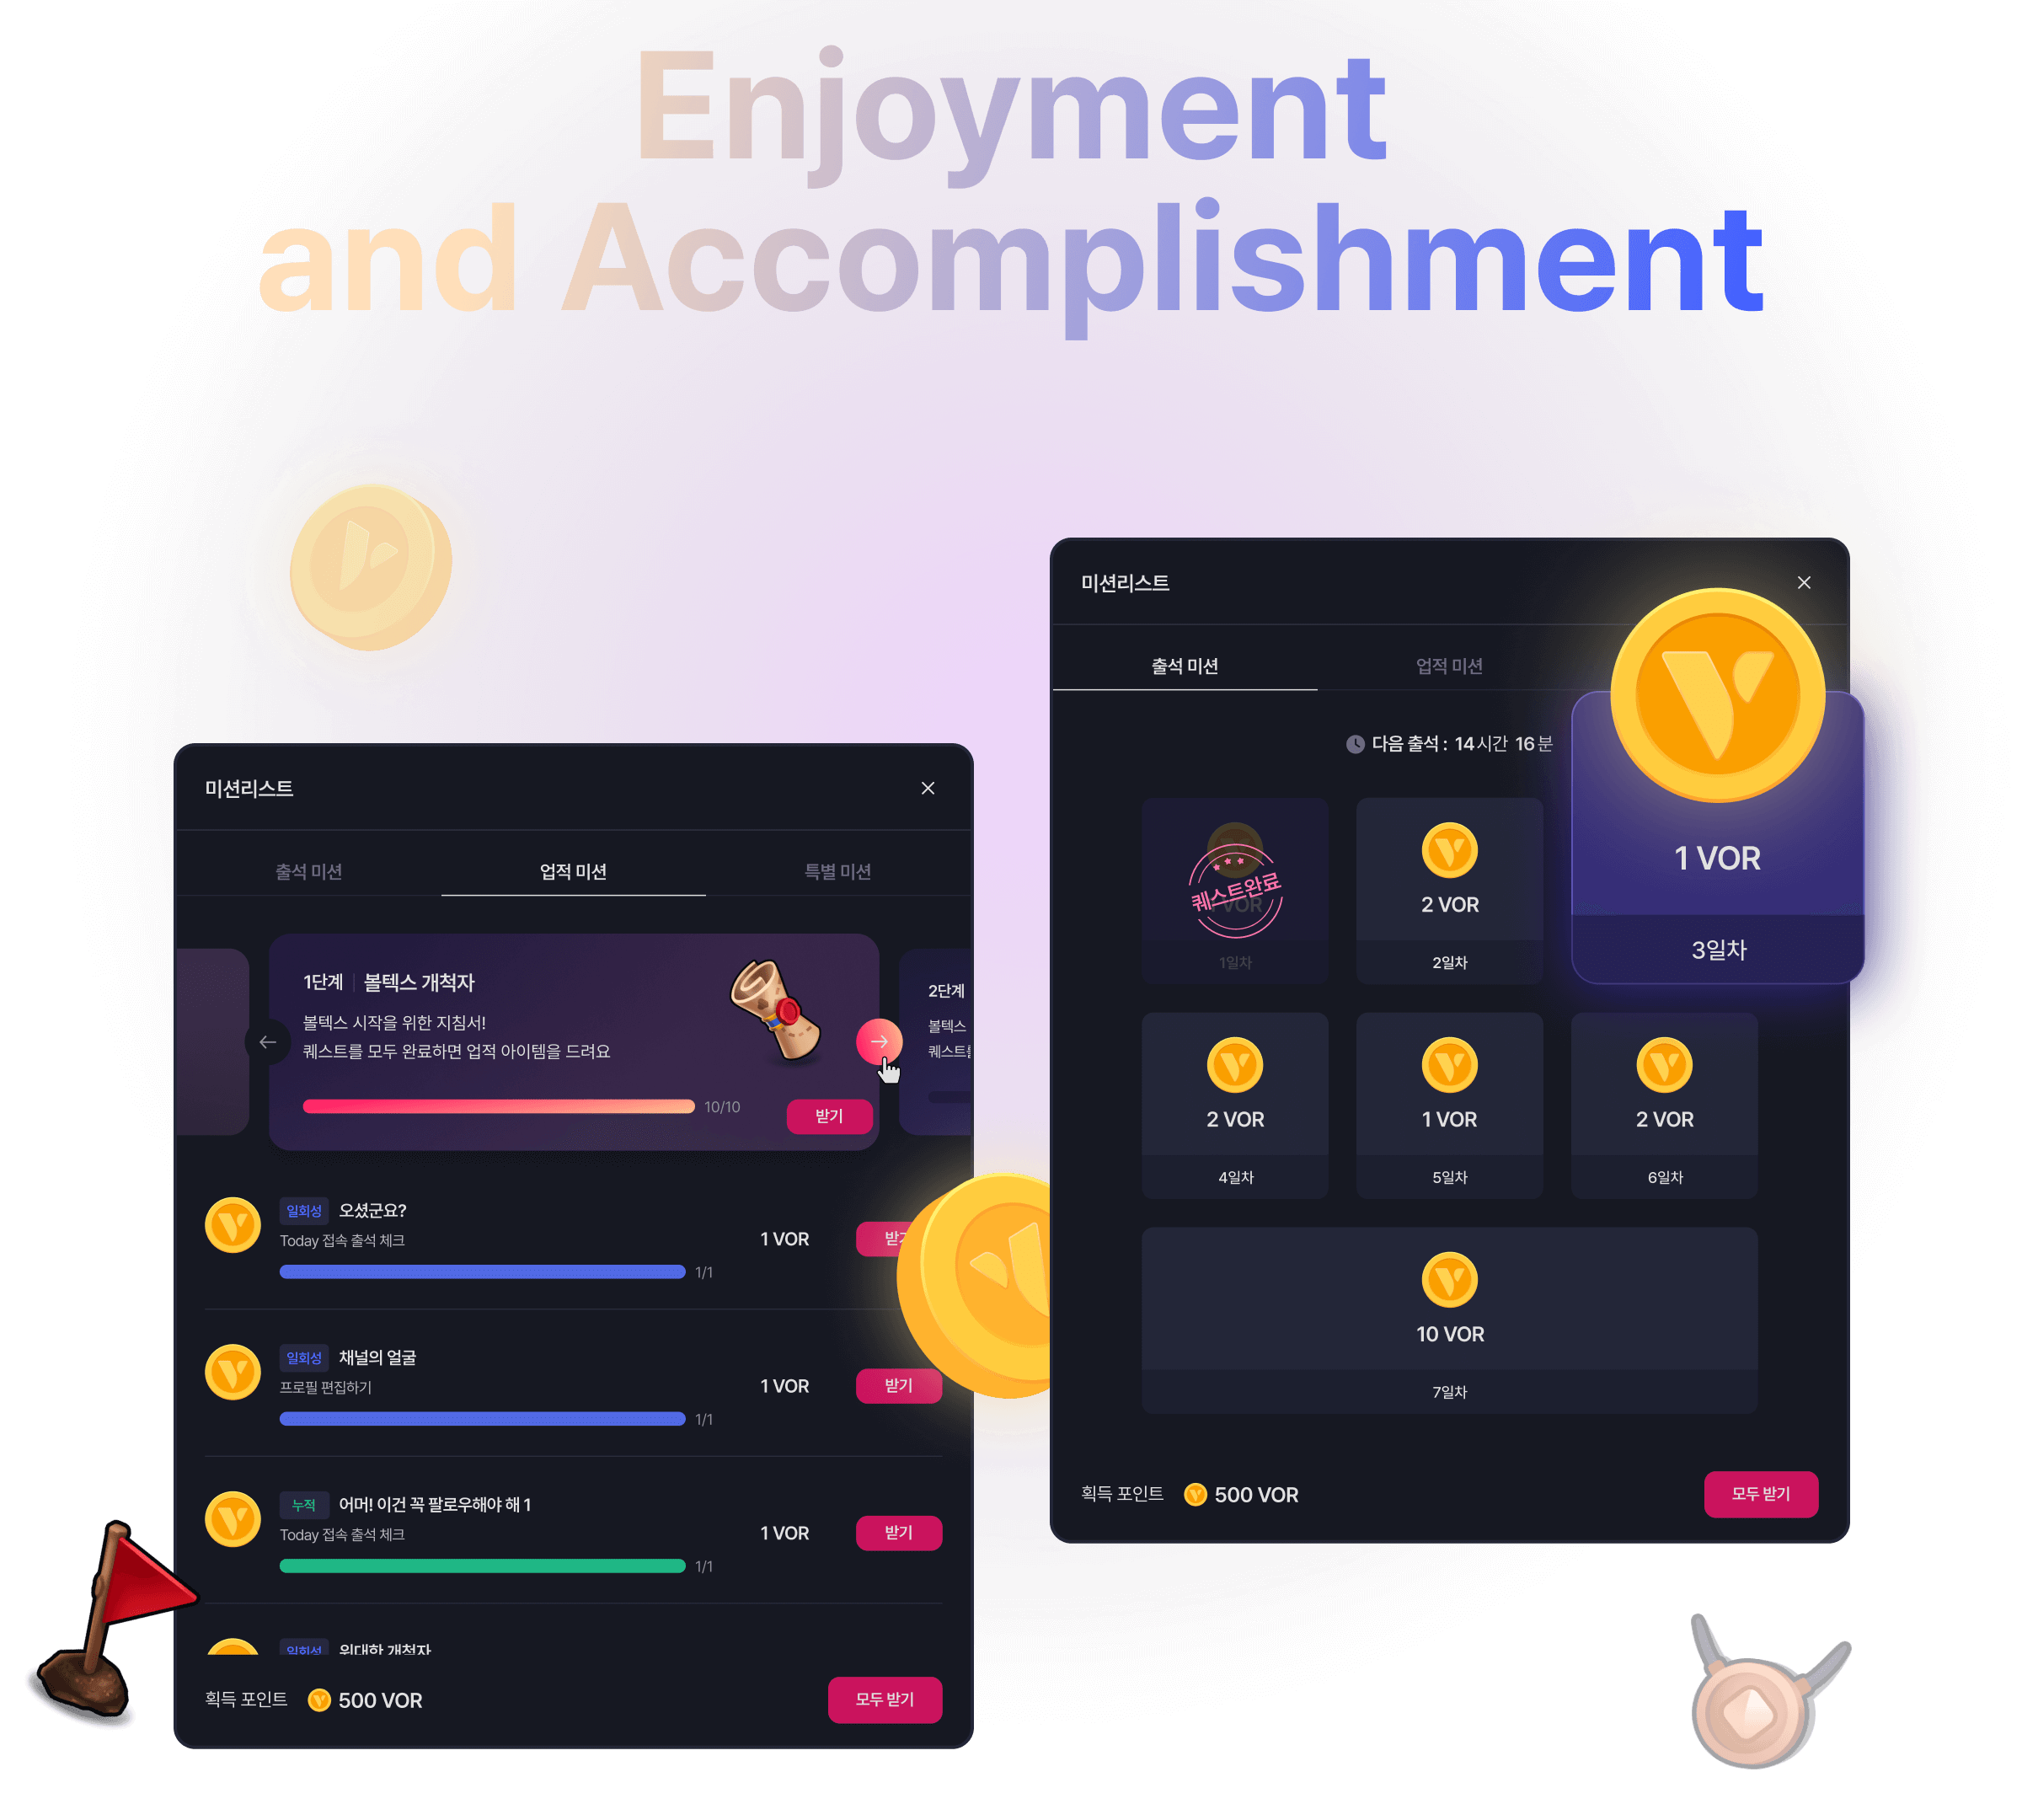 Enjoyment
                and Accomplishment - The mission function provides users with a positive community experience that can be played like a game with an appropriate sense of accomplishment.